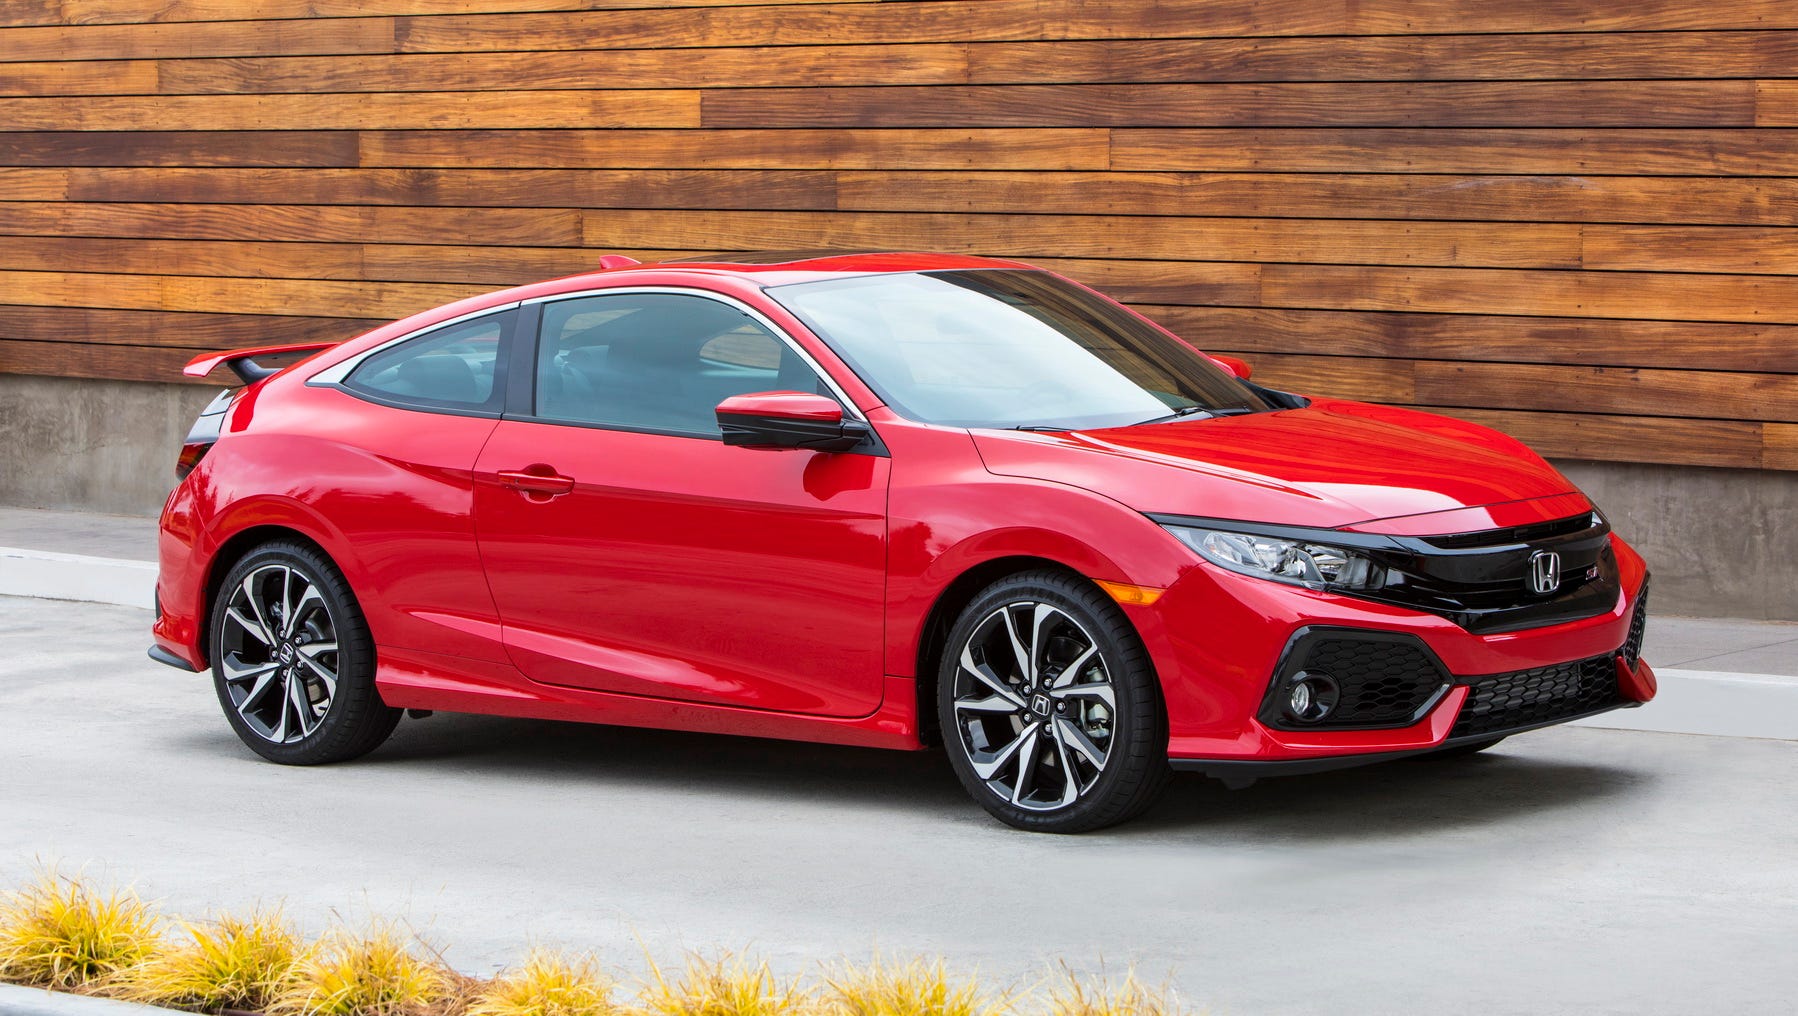 review: Civic Si Coupe is enthusiast-oriented